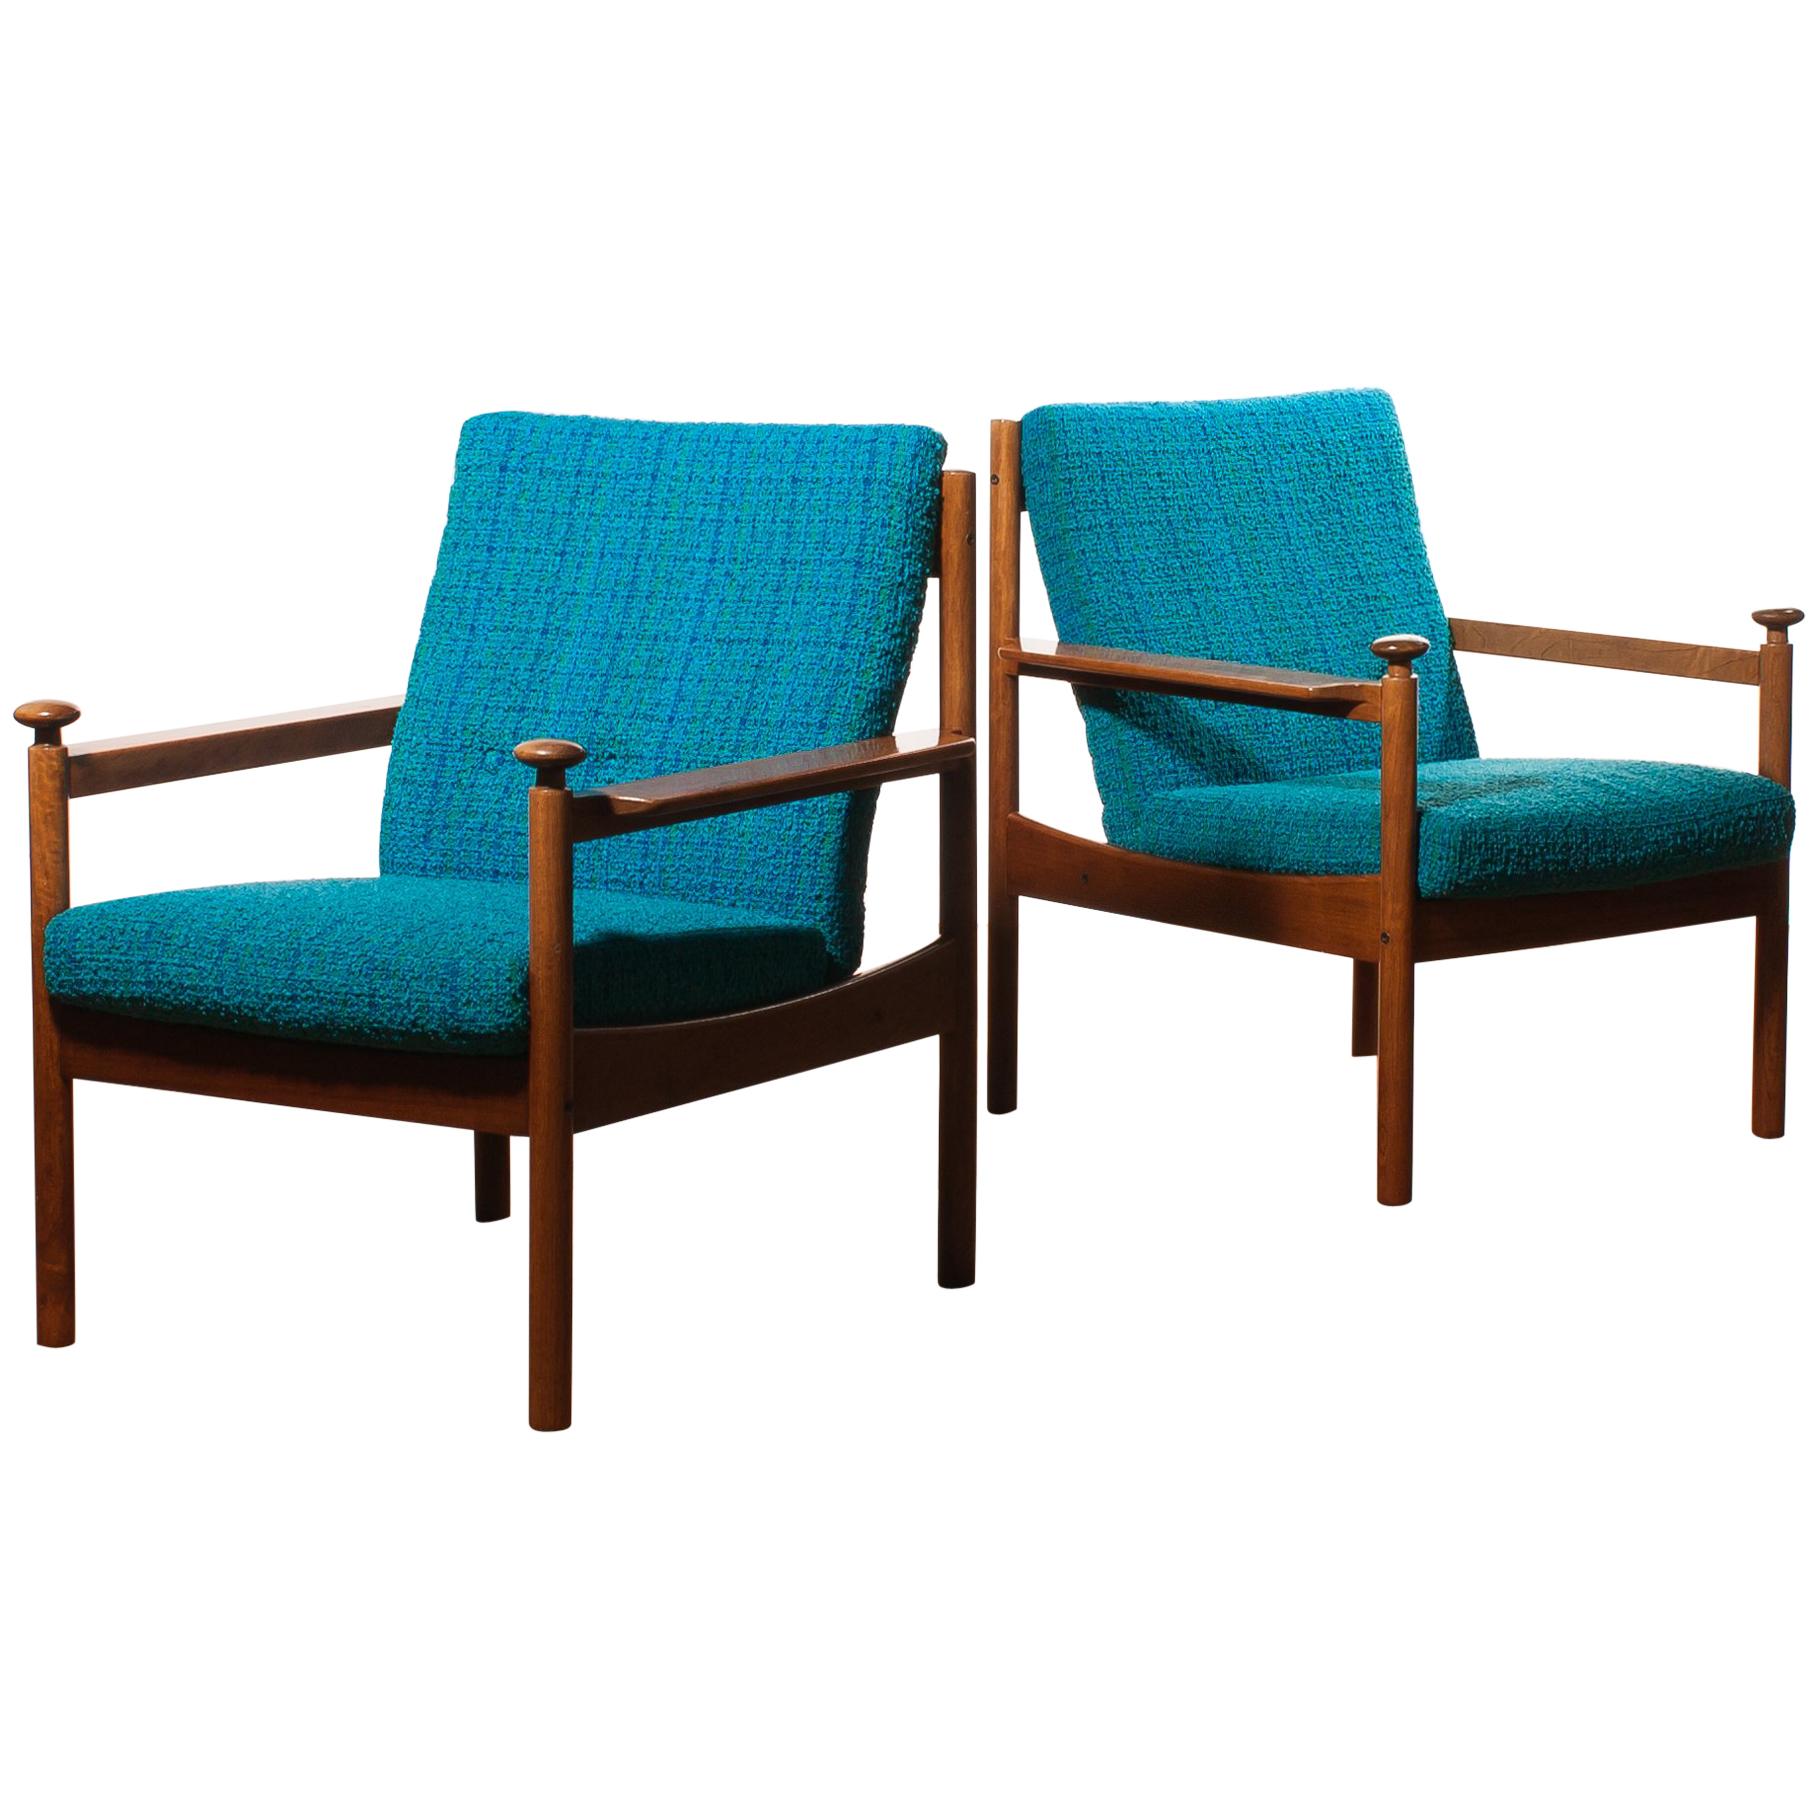 Beautiful chairs designed by Torbjørn Afdal for Sandvik & Co. Mobler, Norway.
The beech wooden frames with the blue fabric cushions makes it a very nice combination.
The condition, wear consistent with age and use.
Period 1950s.
Dimensions: H 83